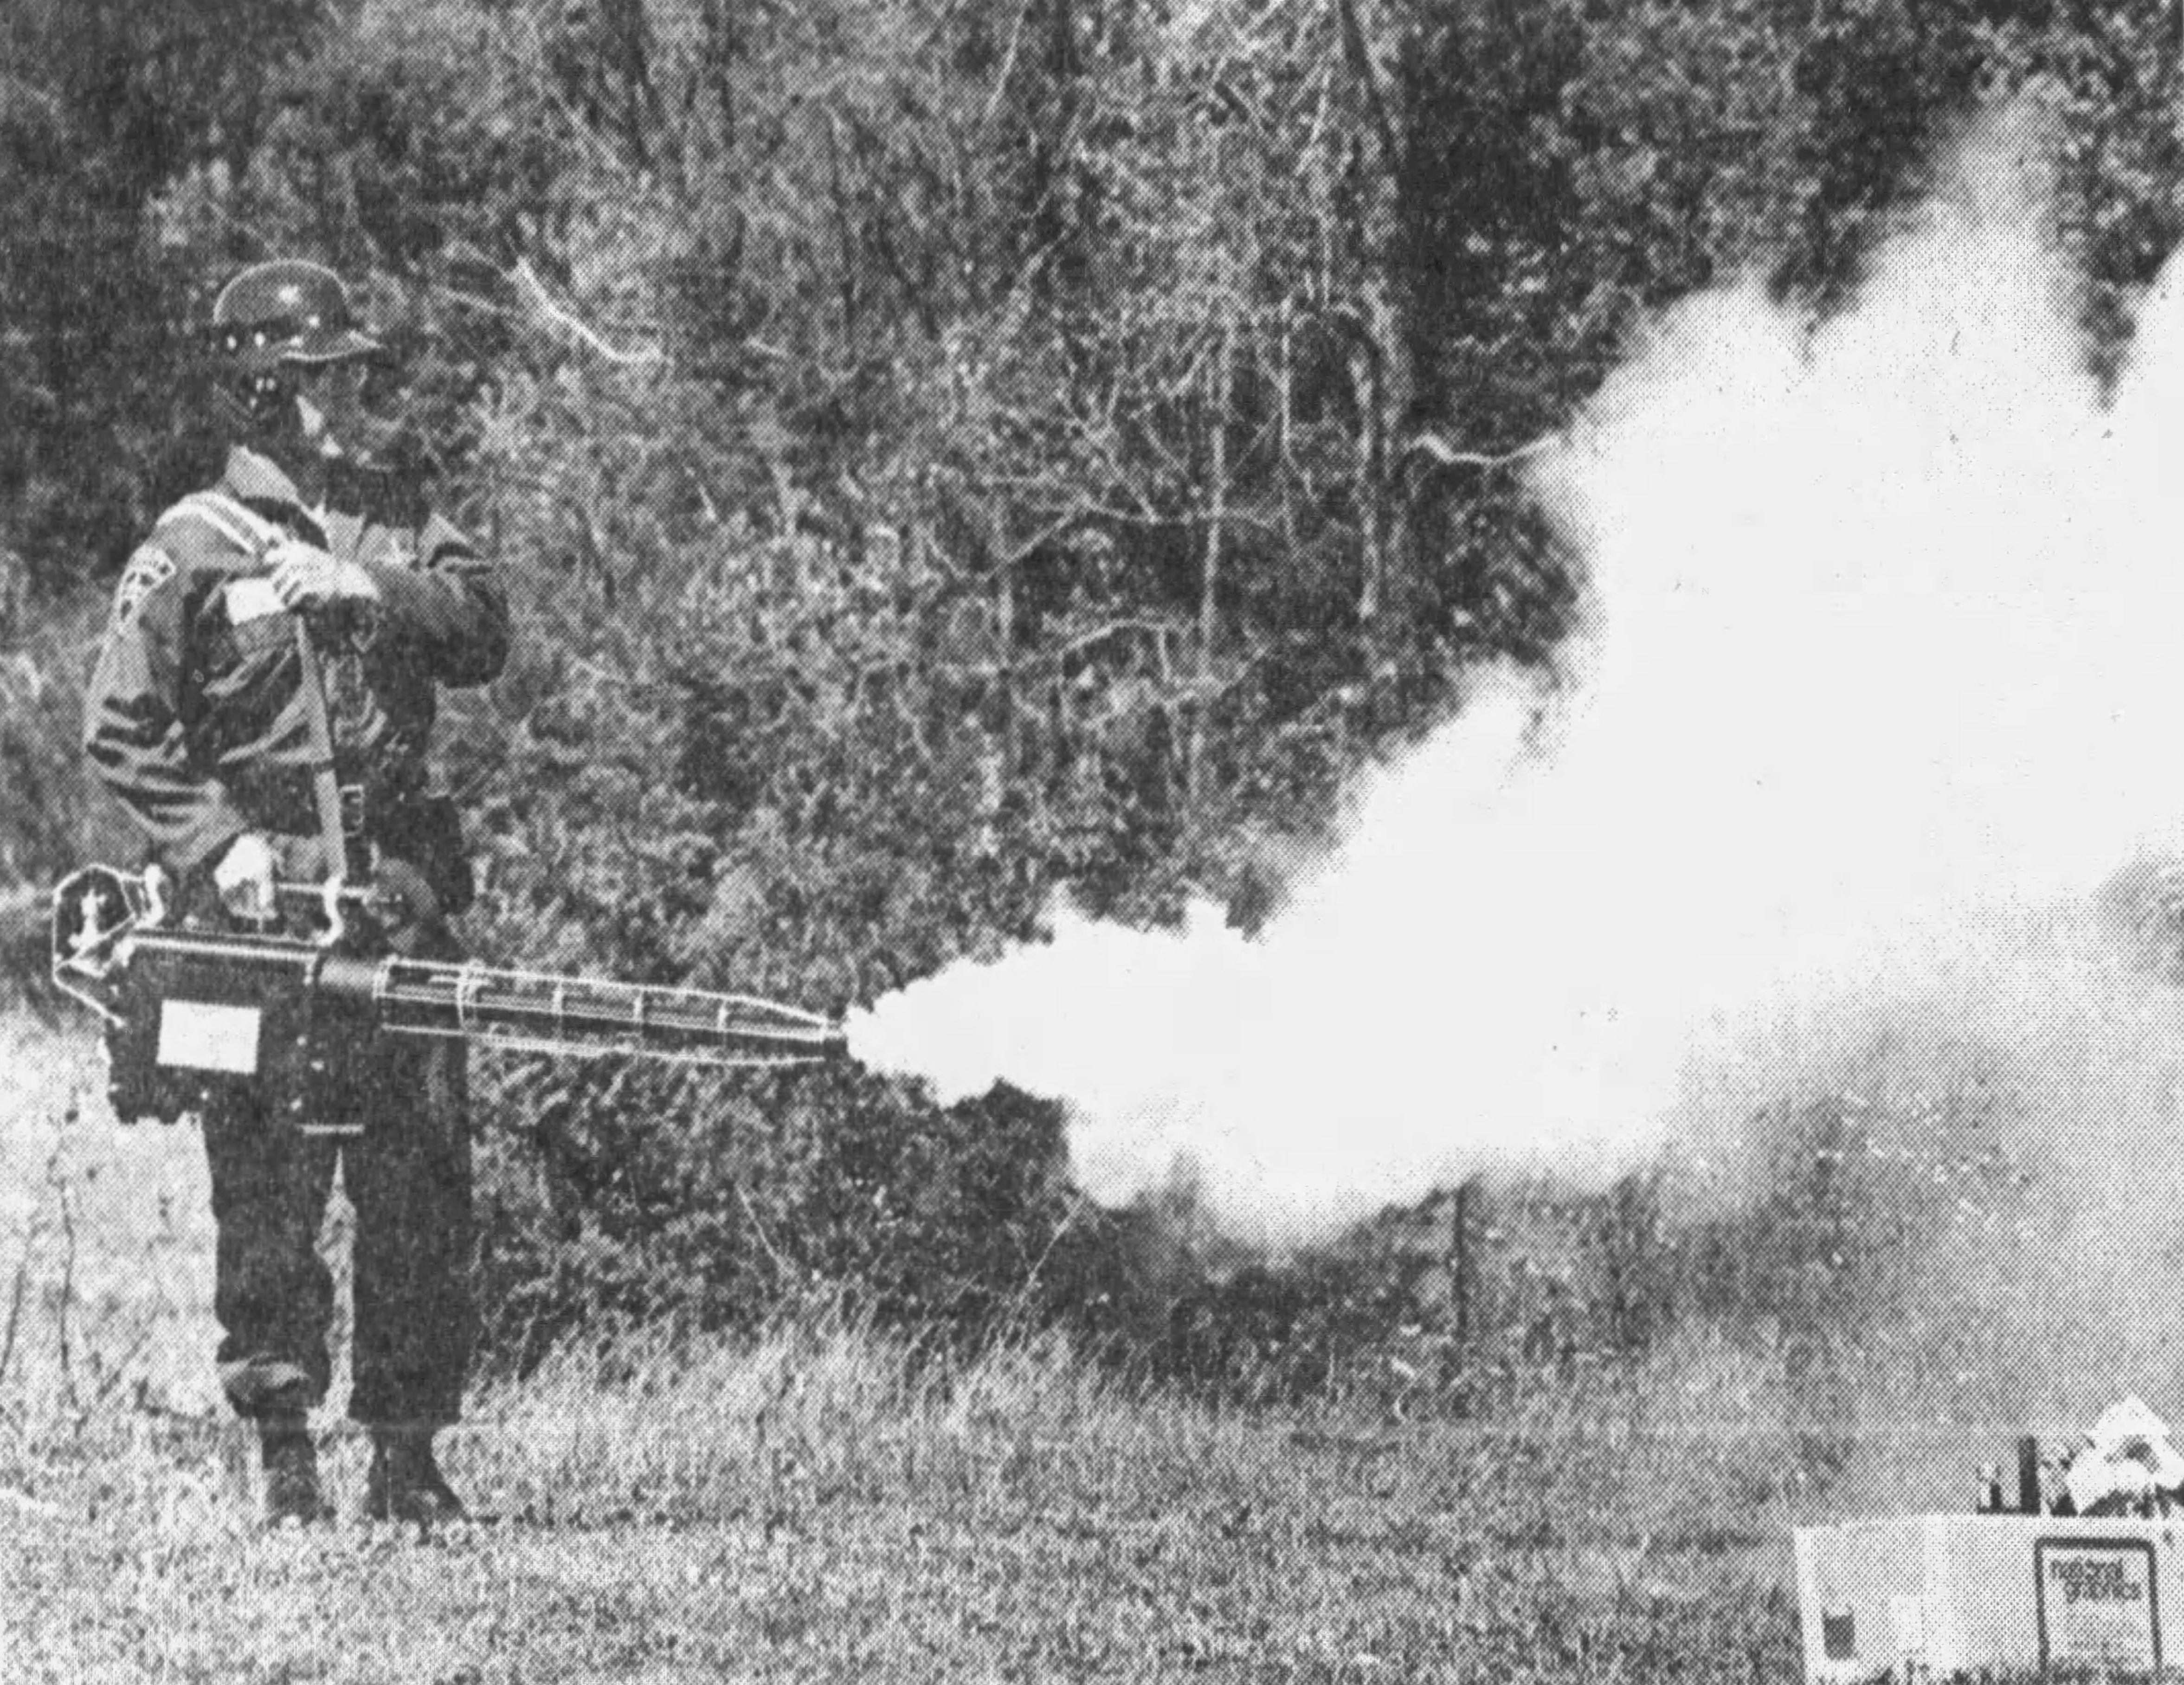 Black and white newspaper clipping of an officer standing in a field just front a forest/brush line, fogging out into the open area as part of a demonstration. The officer is wearing a riot helmet and coveralls and has the fogger slug over their right arm with a strap they are also holding with their left hand. The officer stands in the left part of the frame, fogging to the right, using a GOEC-style fogger with the nozzle tip right in the middle of the photo.